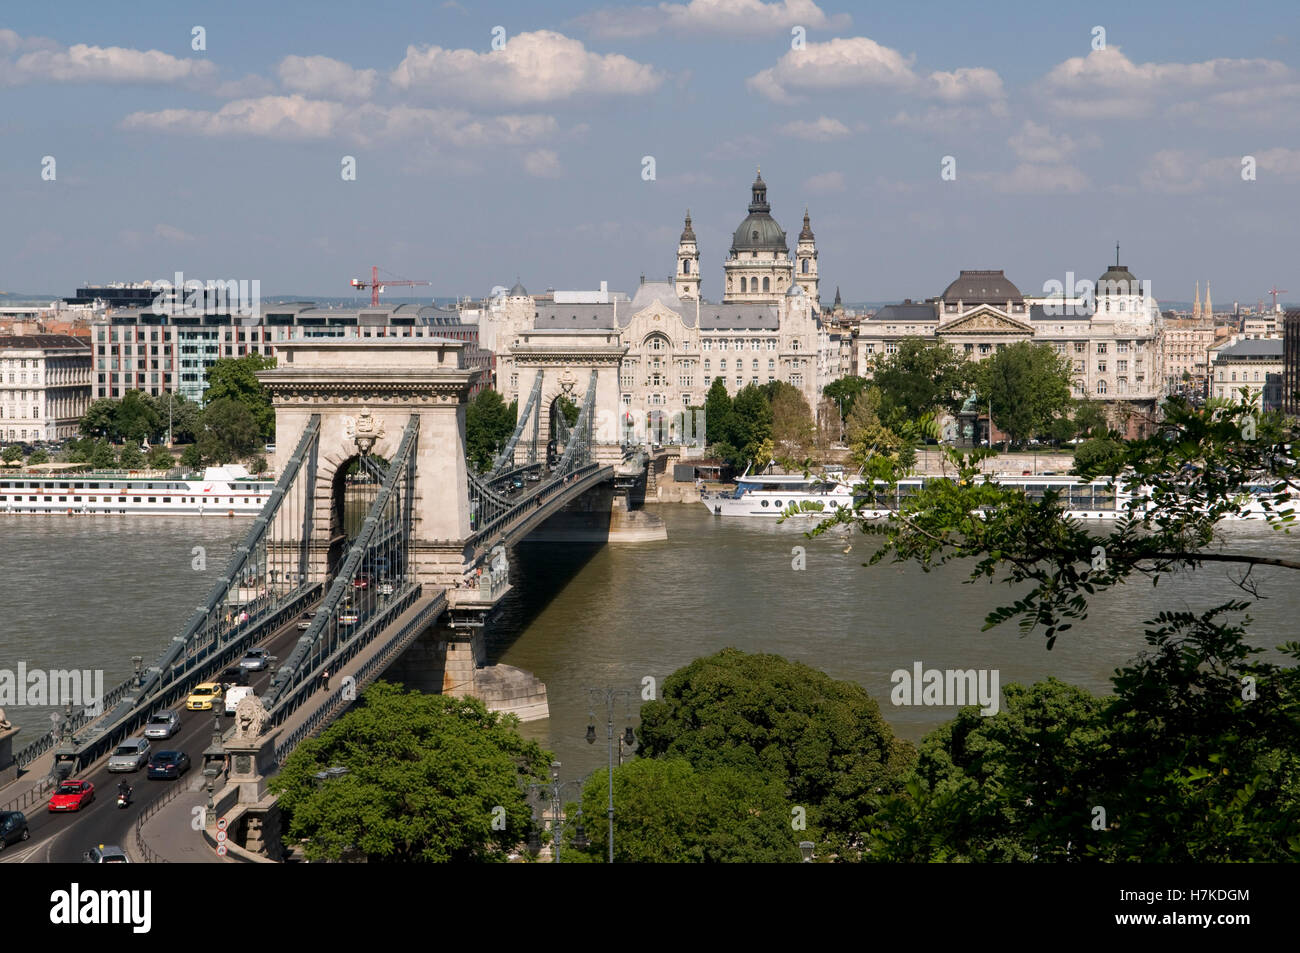 View from the Castle Hill on the banks of the Danube river with the Chain Bridge, Gresham Palace and St. Stephen's Basilica Stock Photo